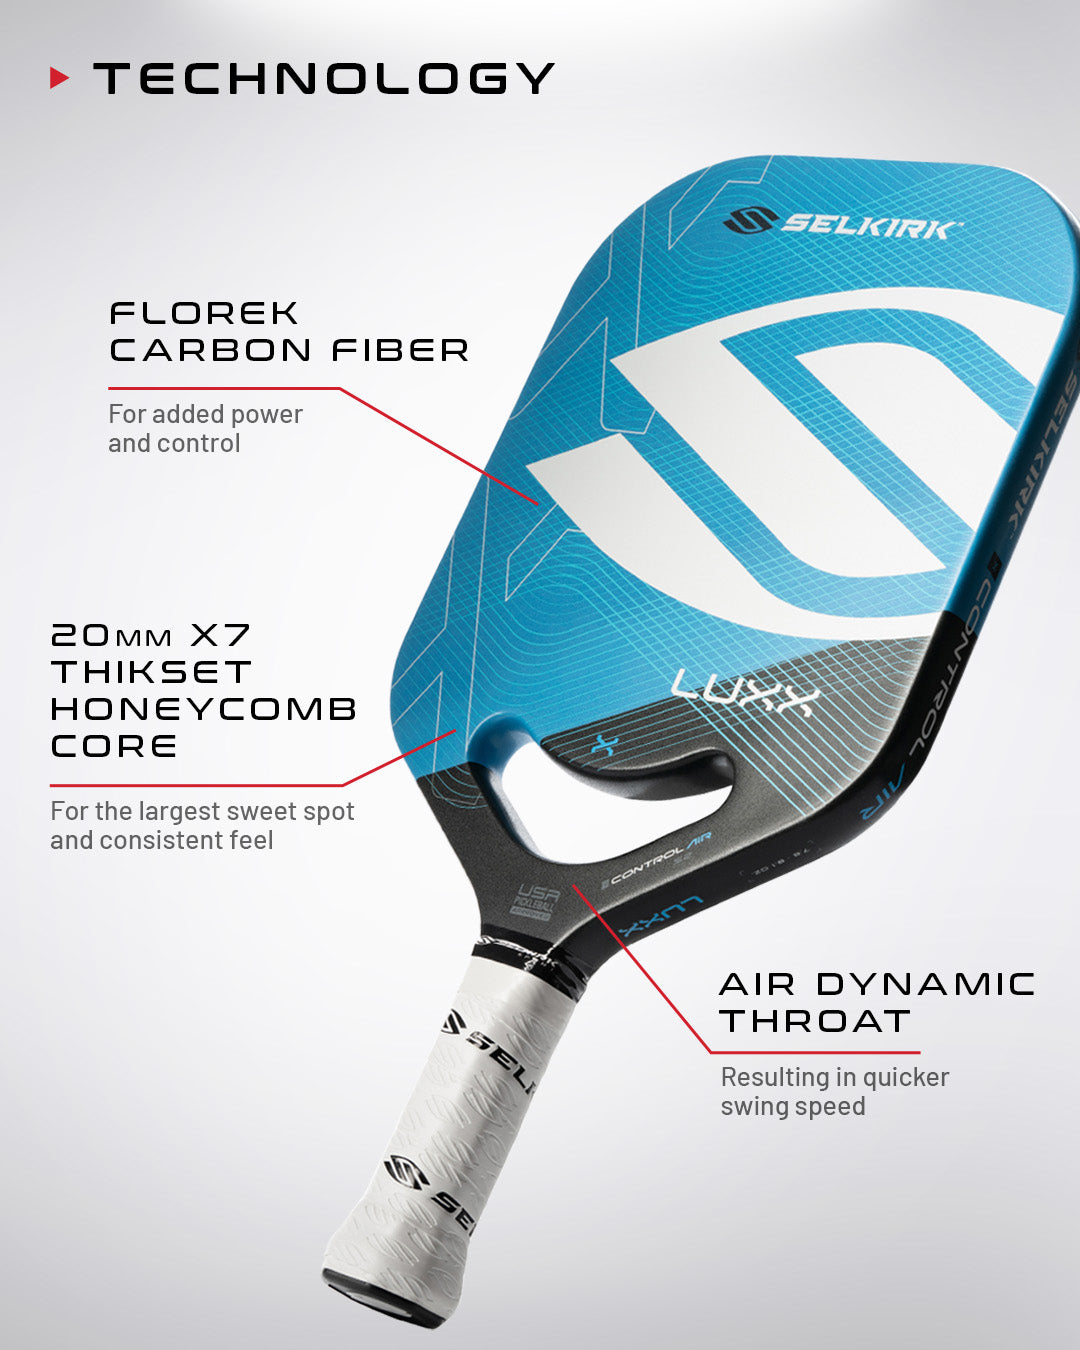 LUXX Control Air S2 by Selkirk Sport